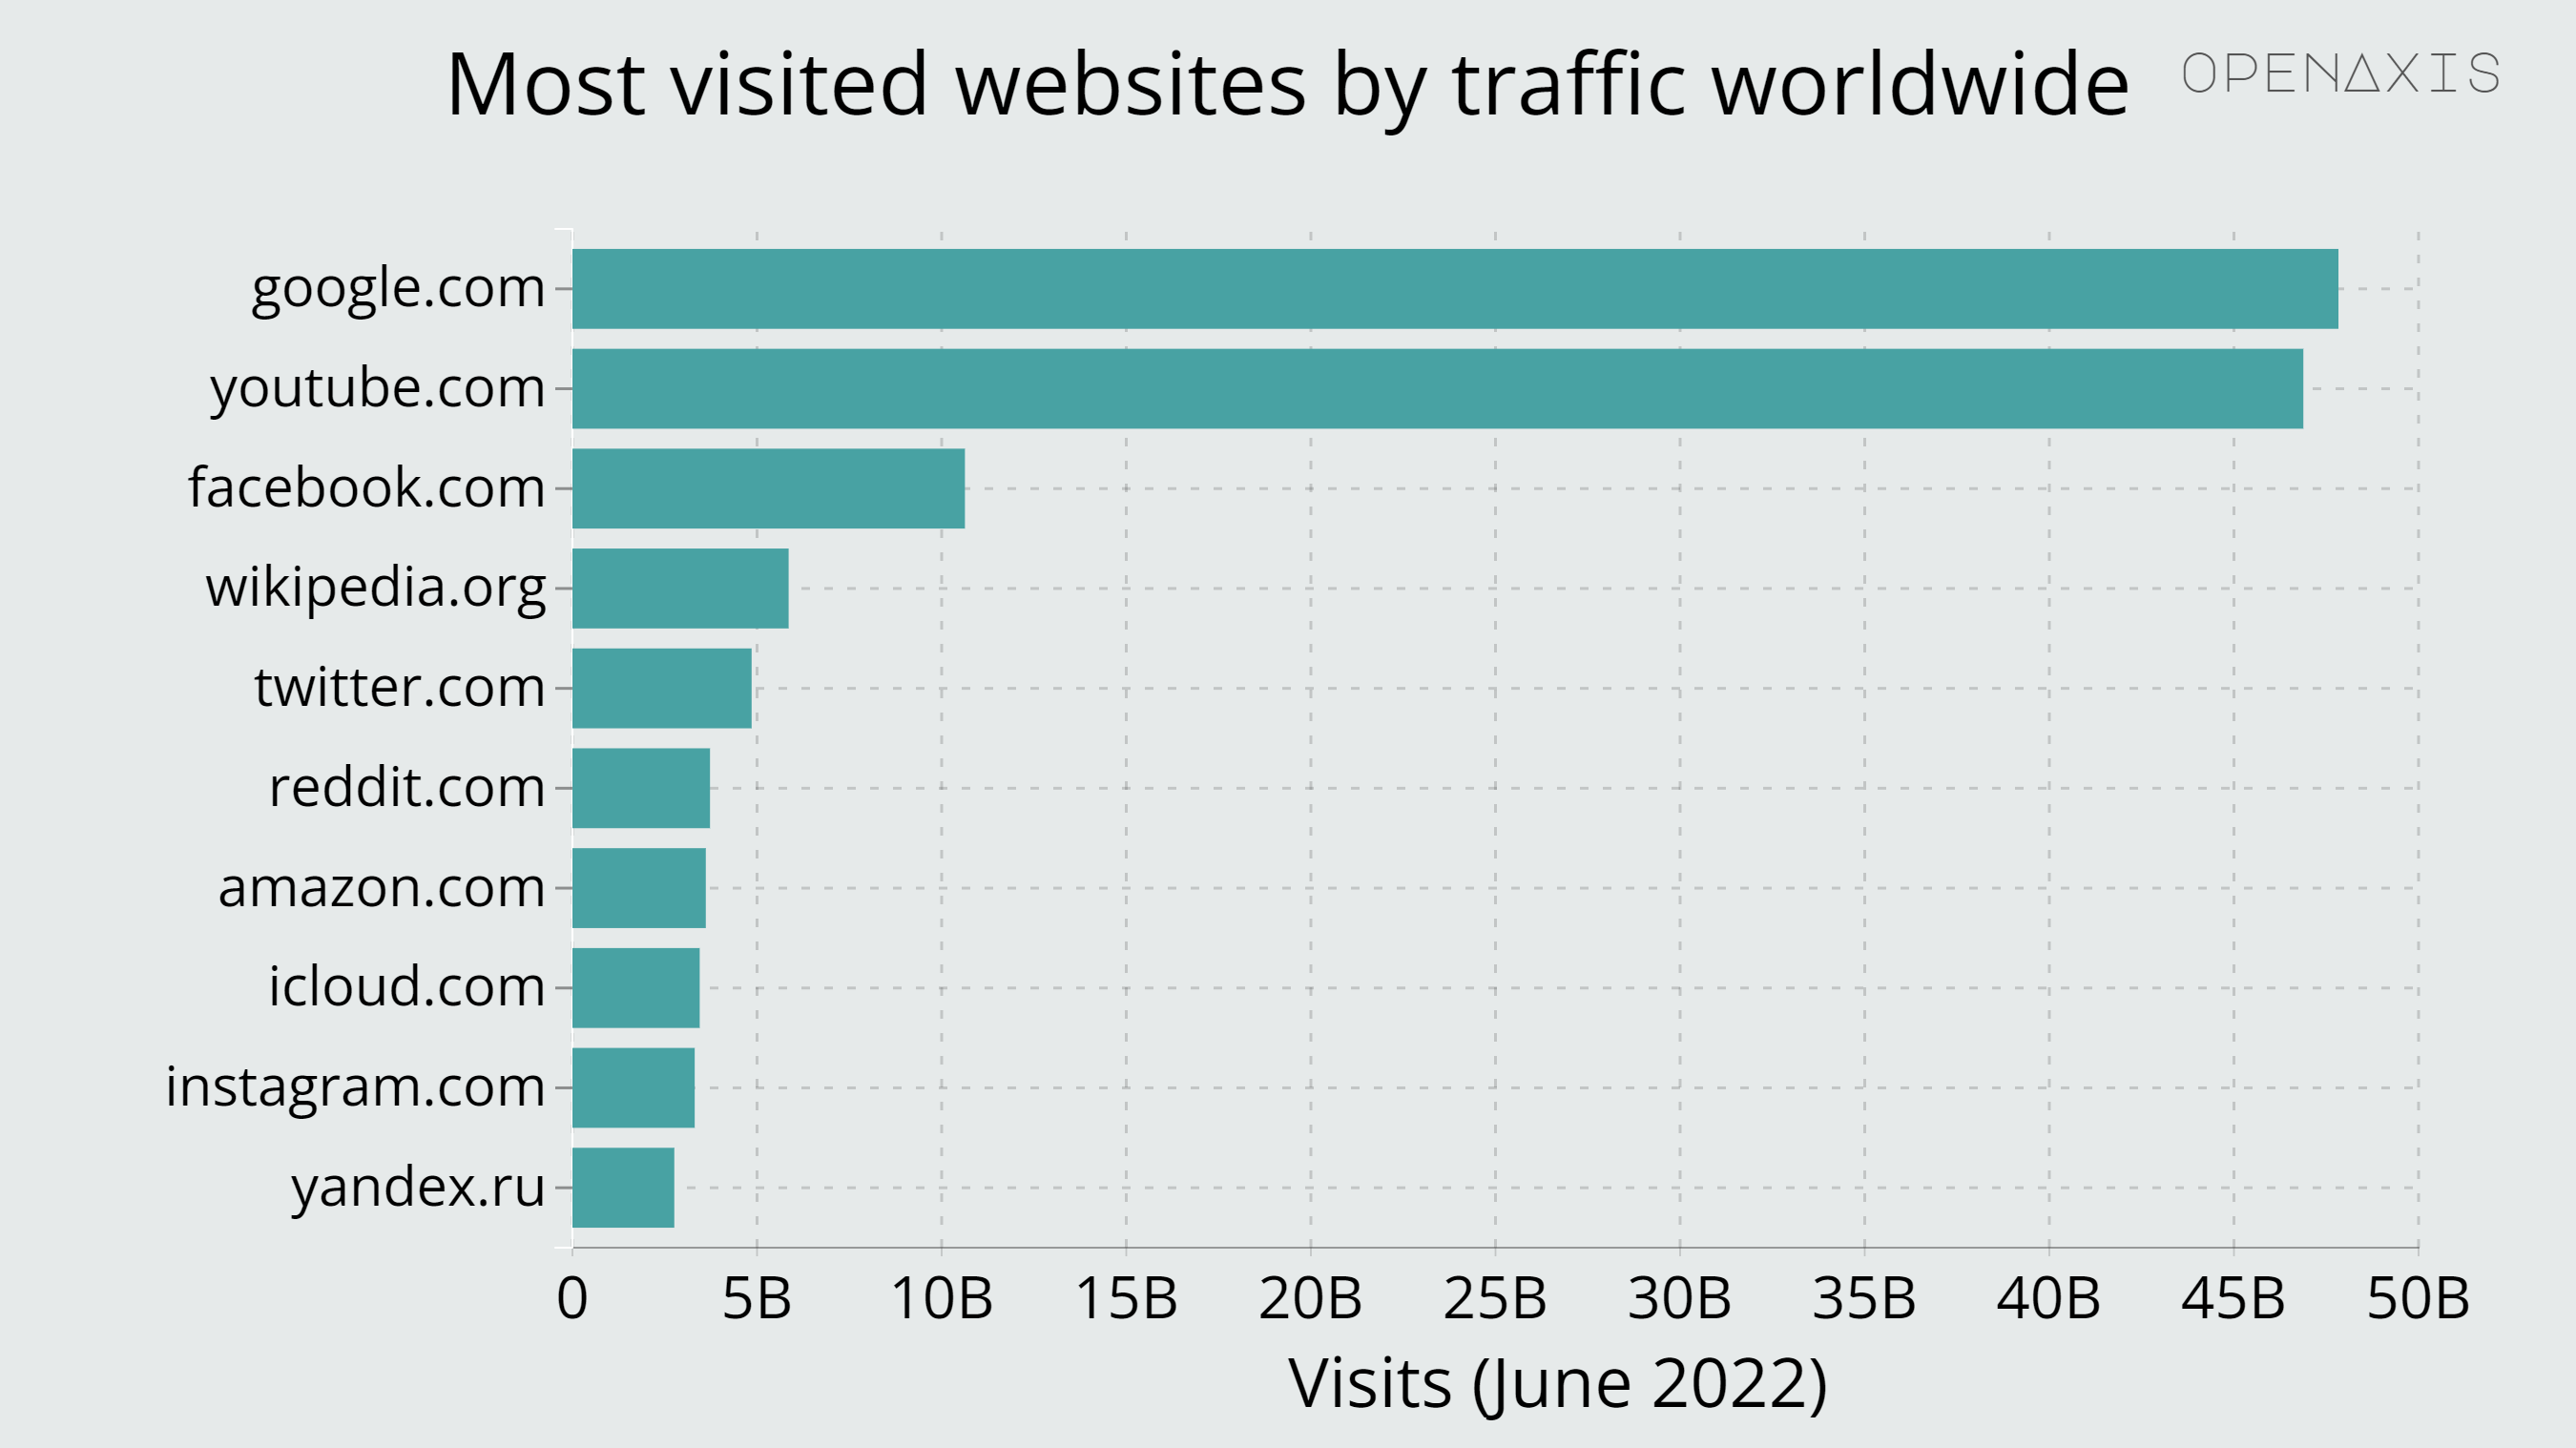 <p>Based on data from the Semrush Traffic Analytics tool, this page reveals the most visited websites. Updated monthly on <a href="https://www.semrush.com/website/top/" target="_blank">Semrush</a></p><p><br /></p><p><span data-index="0" data-denotation-char data-id="0" data-value="&lt;a href=&quot;/search?q=%23internet&quot; target=_self&gt;#internet" data-link="/search?q=%23internet">﻿<span contenteditable="false"><span></span><a href="/search?q=%23internet" target="_self">#internet</a></span>﻿</span> <span data-index="0" data-denotation-char data-id="0" data-value="&lt;a href=&quot;/search?q=%23search&quot; target=_self&gt;#search" data-link="/search?q=%23search">﻿<span contenteditable="false"><span></span><a href="/search?q=%23search" target="_self">#search</a></span>﻿</span></p><p><br /></p><p>Source: <a href="/data/4021" target="_blank">Semrush</a></p><p><br /></p>